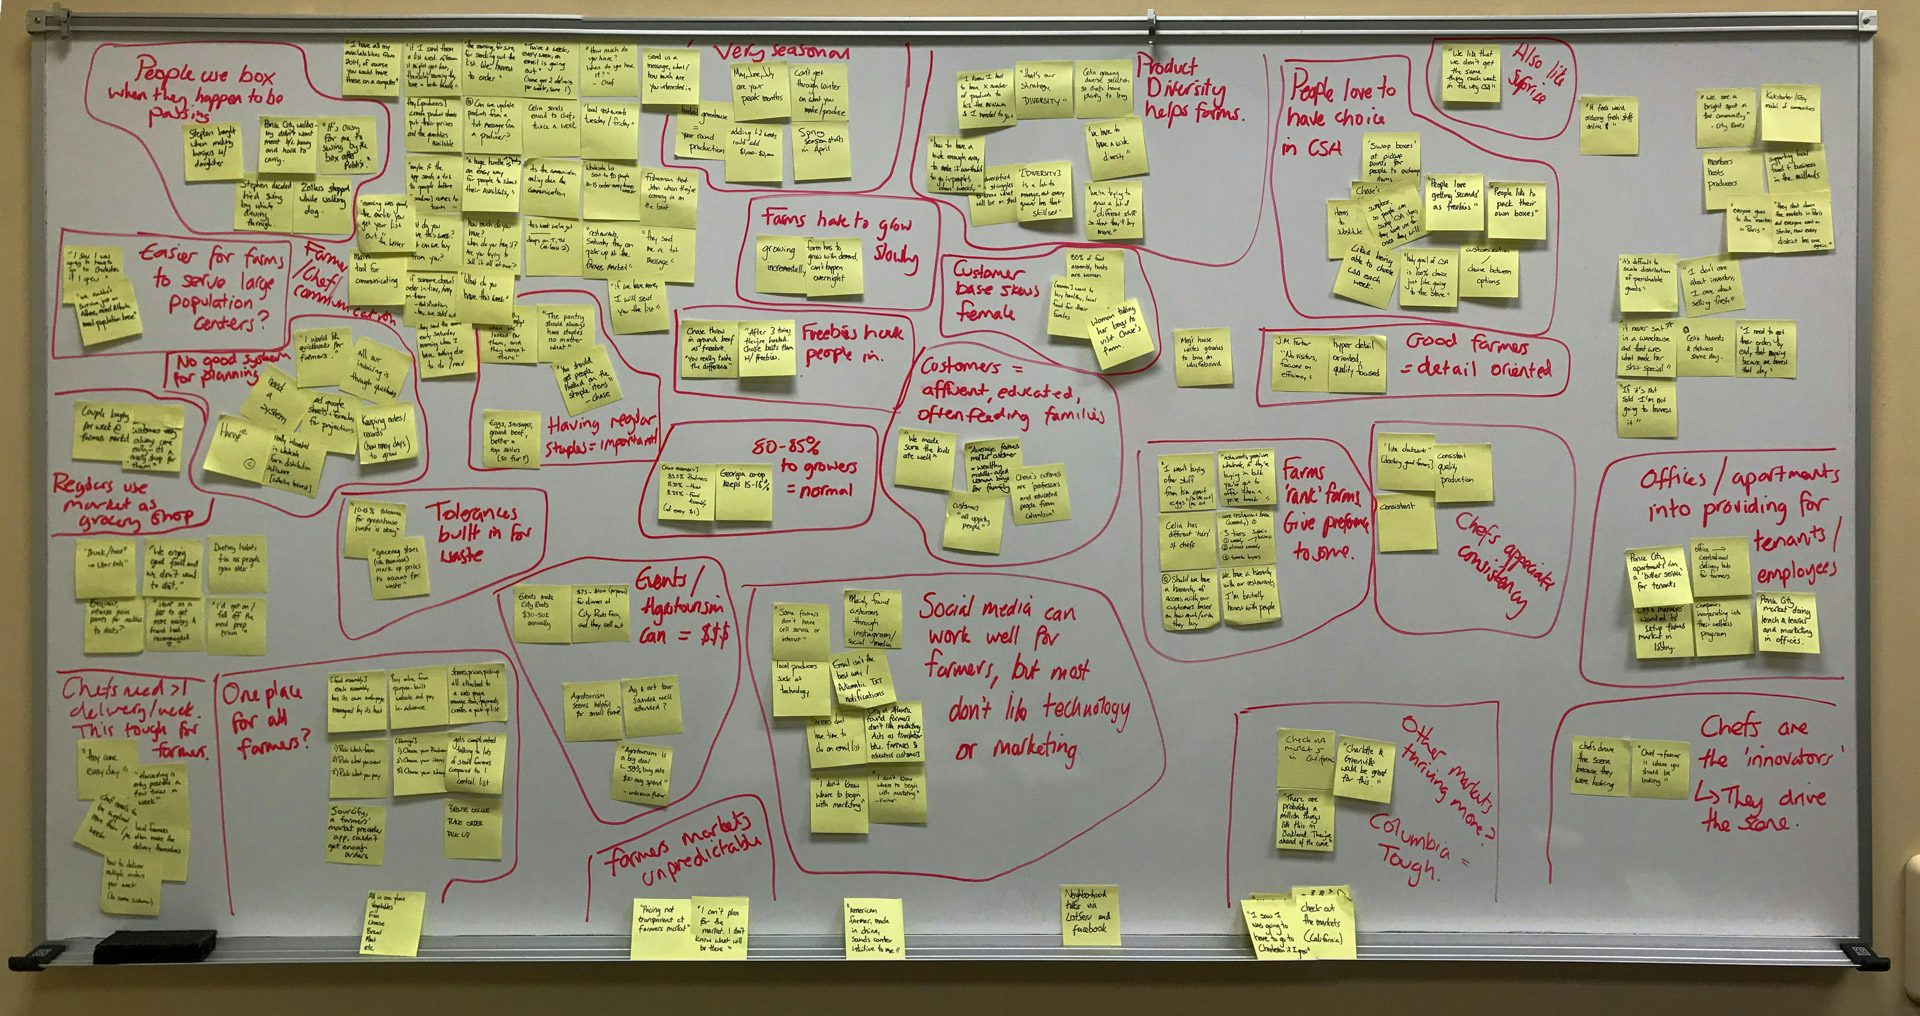 Affinity mapping research findings